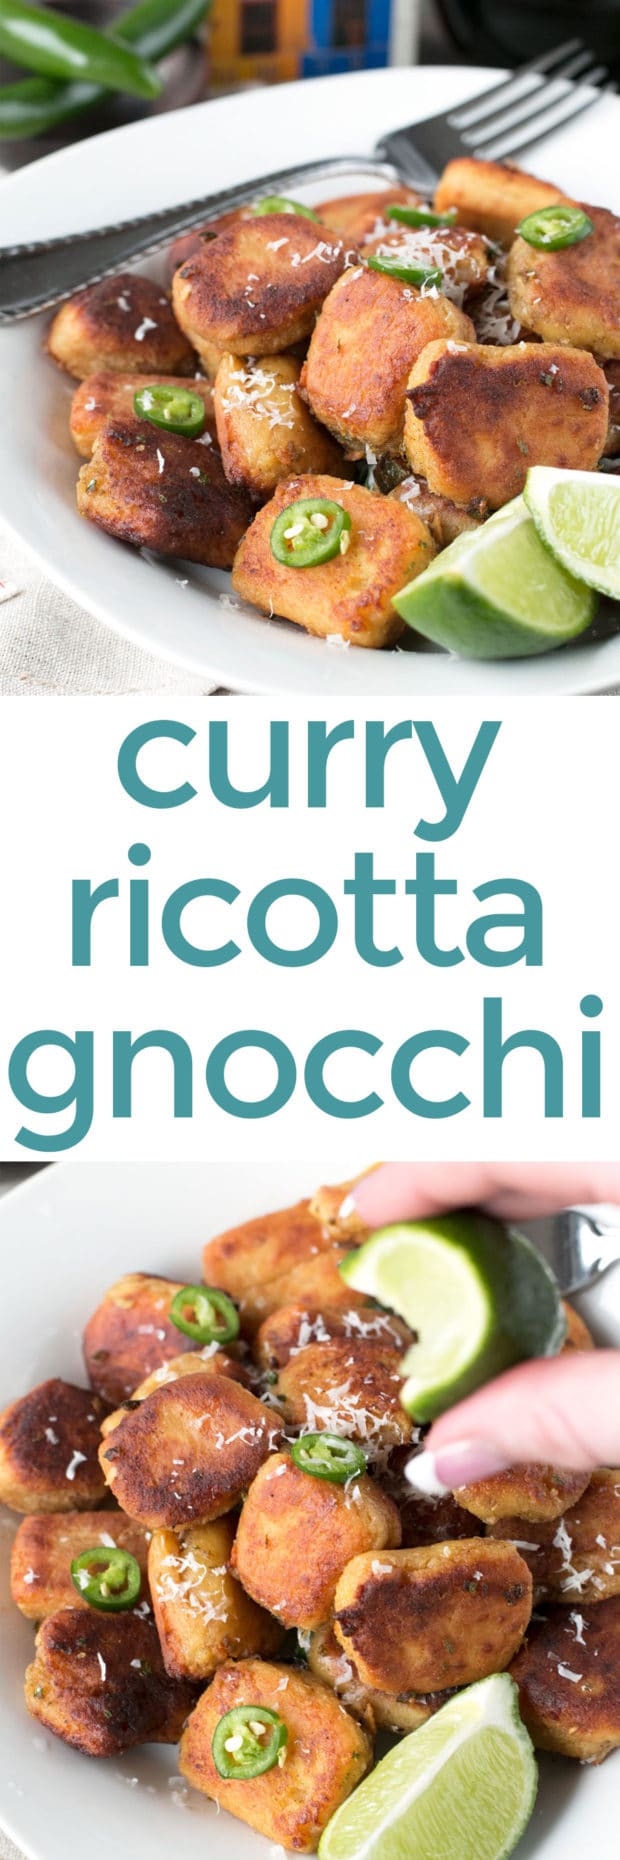 Pan Fried Curry Ricotta Gnocchi in Chile Lime Brown Butter Sauce | cakenknife.com #pasta #dinner #curry